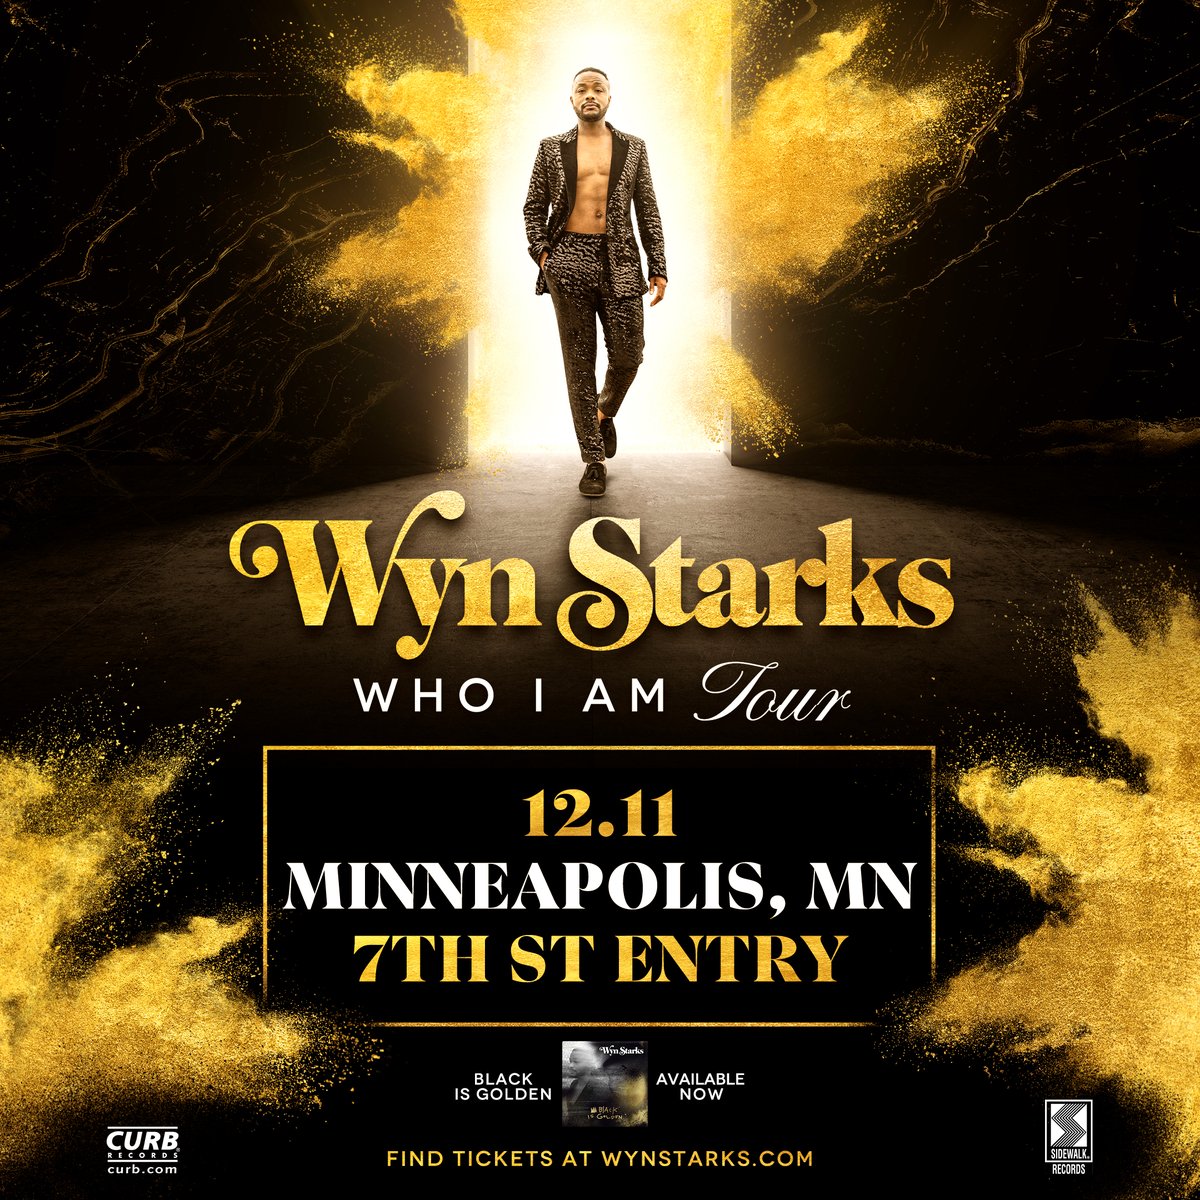 Just Announced: @WynStarks in the 7th St Entry on December 11. On sale now → firstavenue.me/3SiHzot